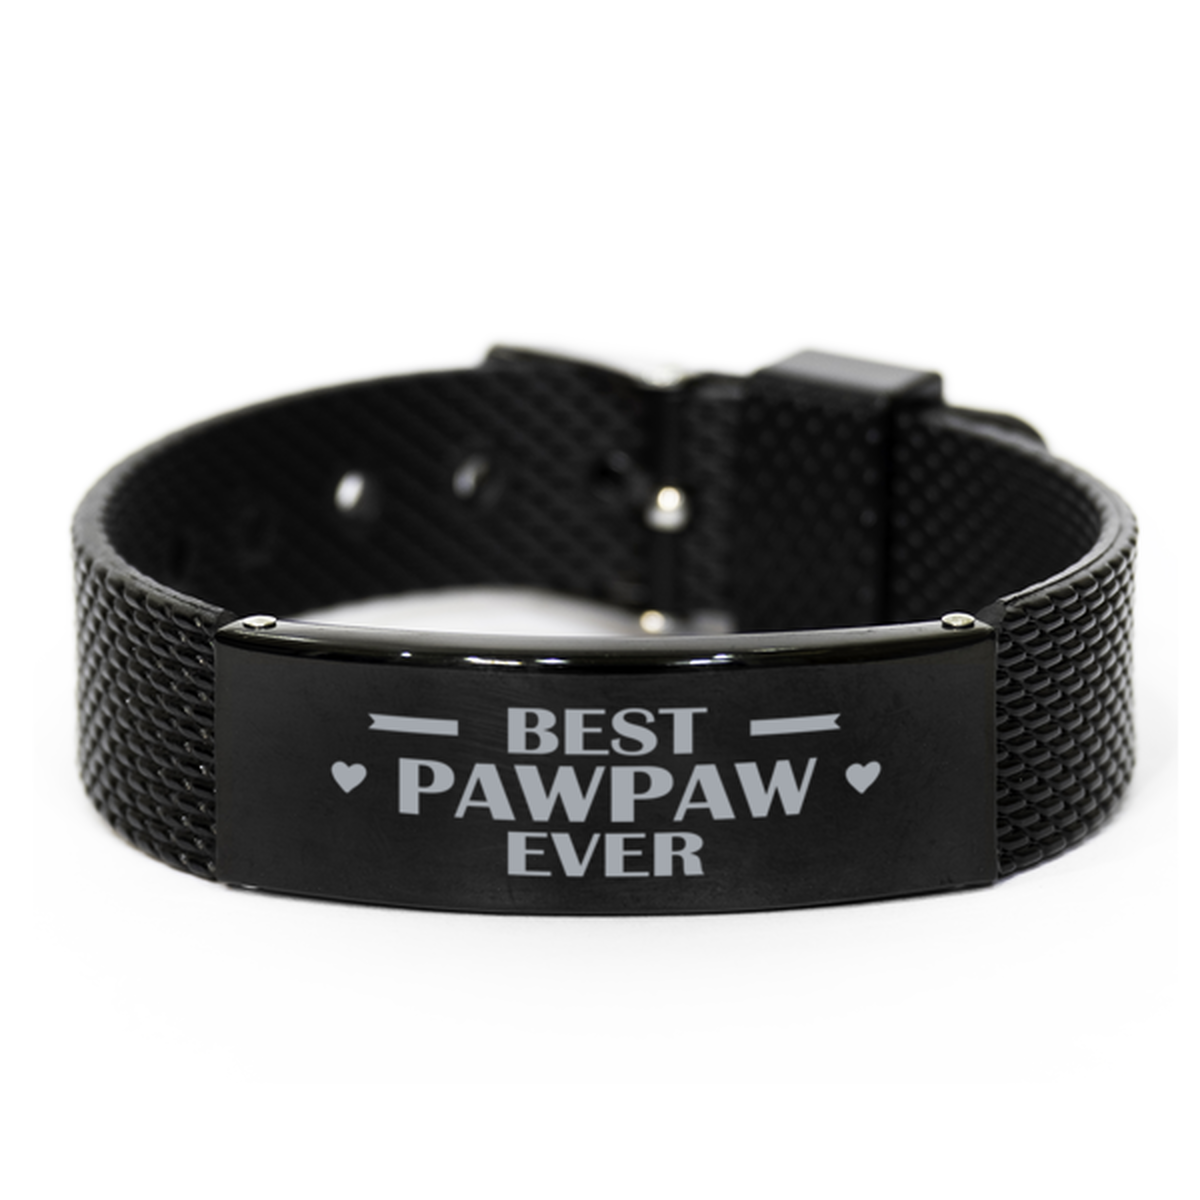 Best Pawpaw Ever Pawpaw Gifts, Gag Engraved Bracelet For Pawpaw, Best Family Gifts For Men